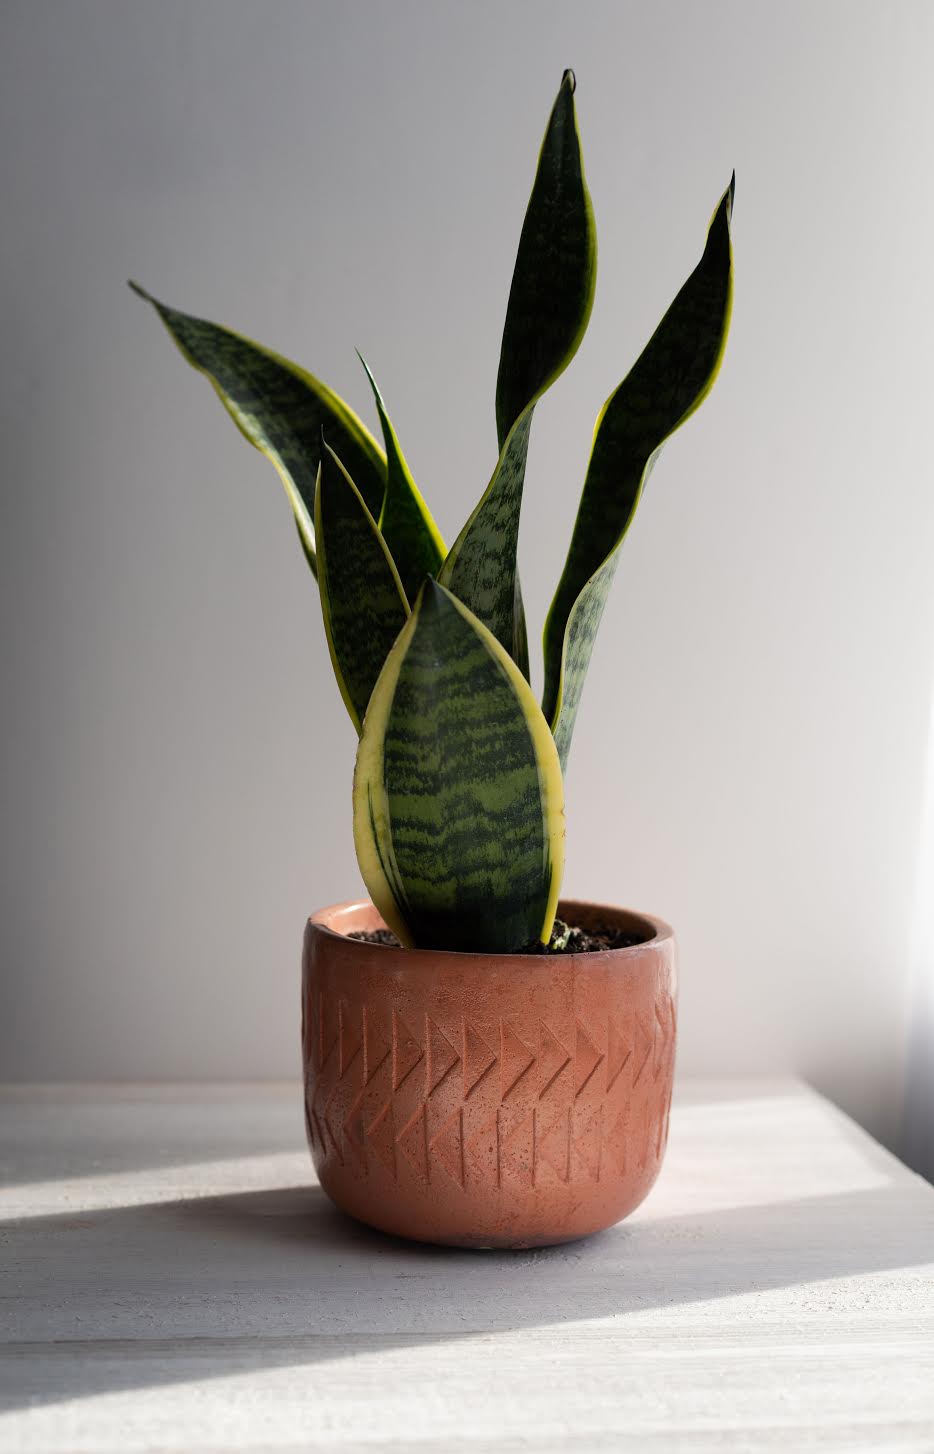 A terracotta-colored concrete Arlo Planter, handmade by Queen City ‘Crete, sits holding a snake plant. Photo by Elizabeth A. Images.